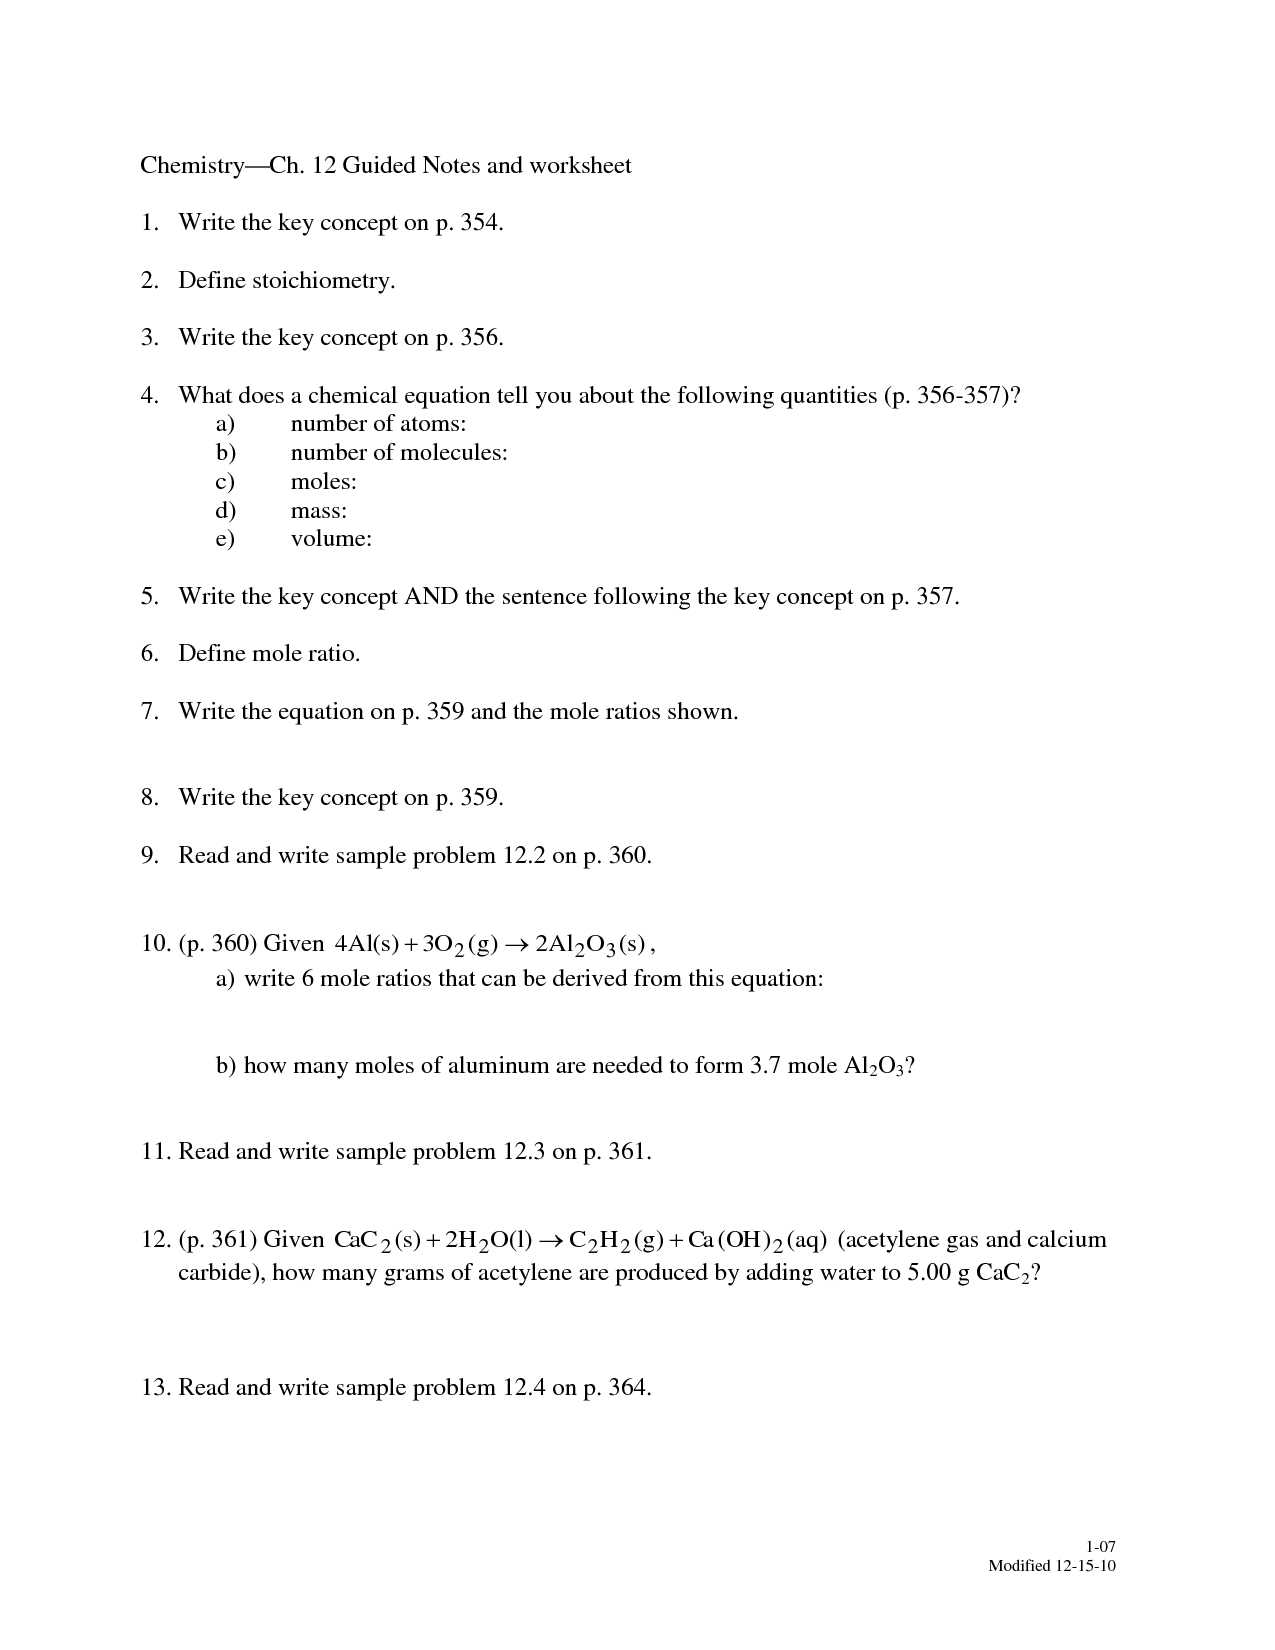 FTCE General Knowledge Test Study Guide 2018-2019: Exam